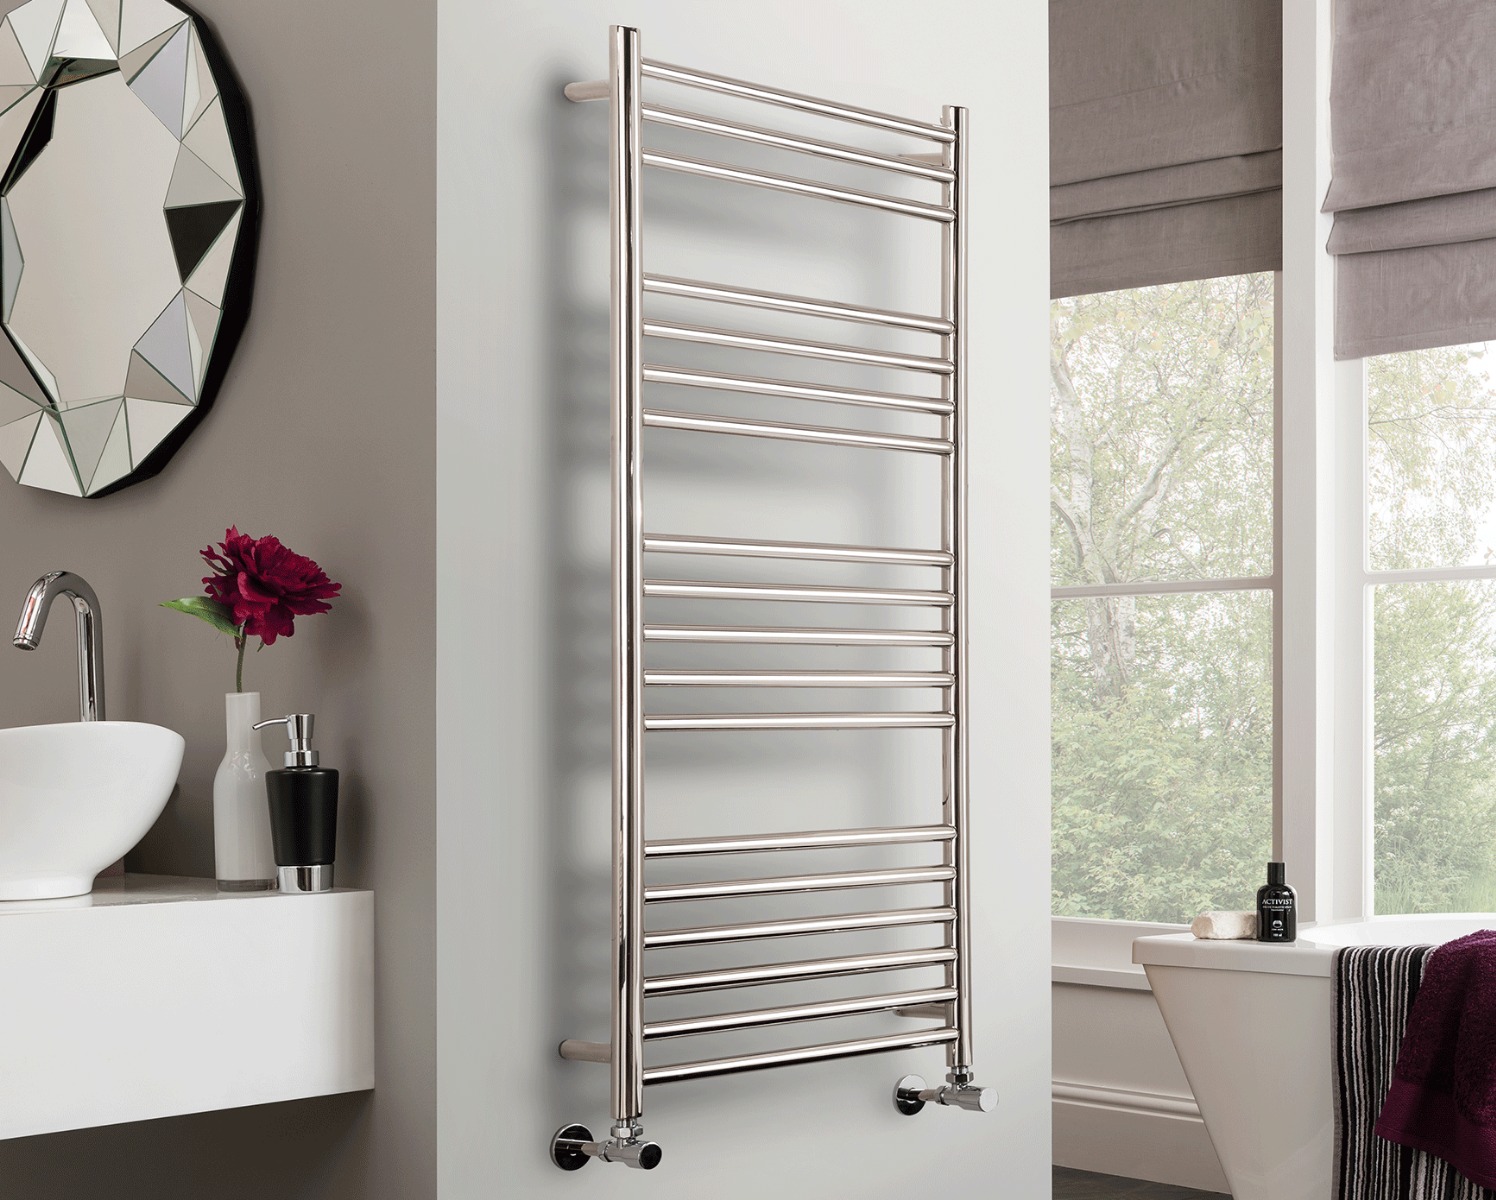 Ladder Rails Chube Heating Only - Polished Stainless Steel 1200x300